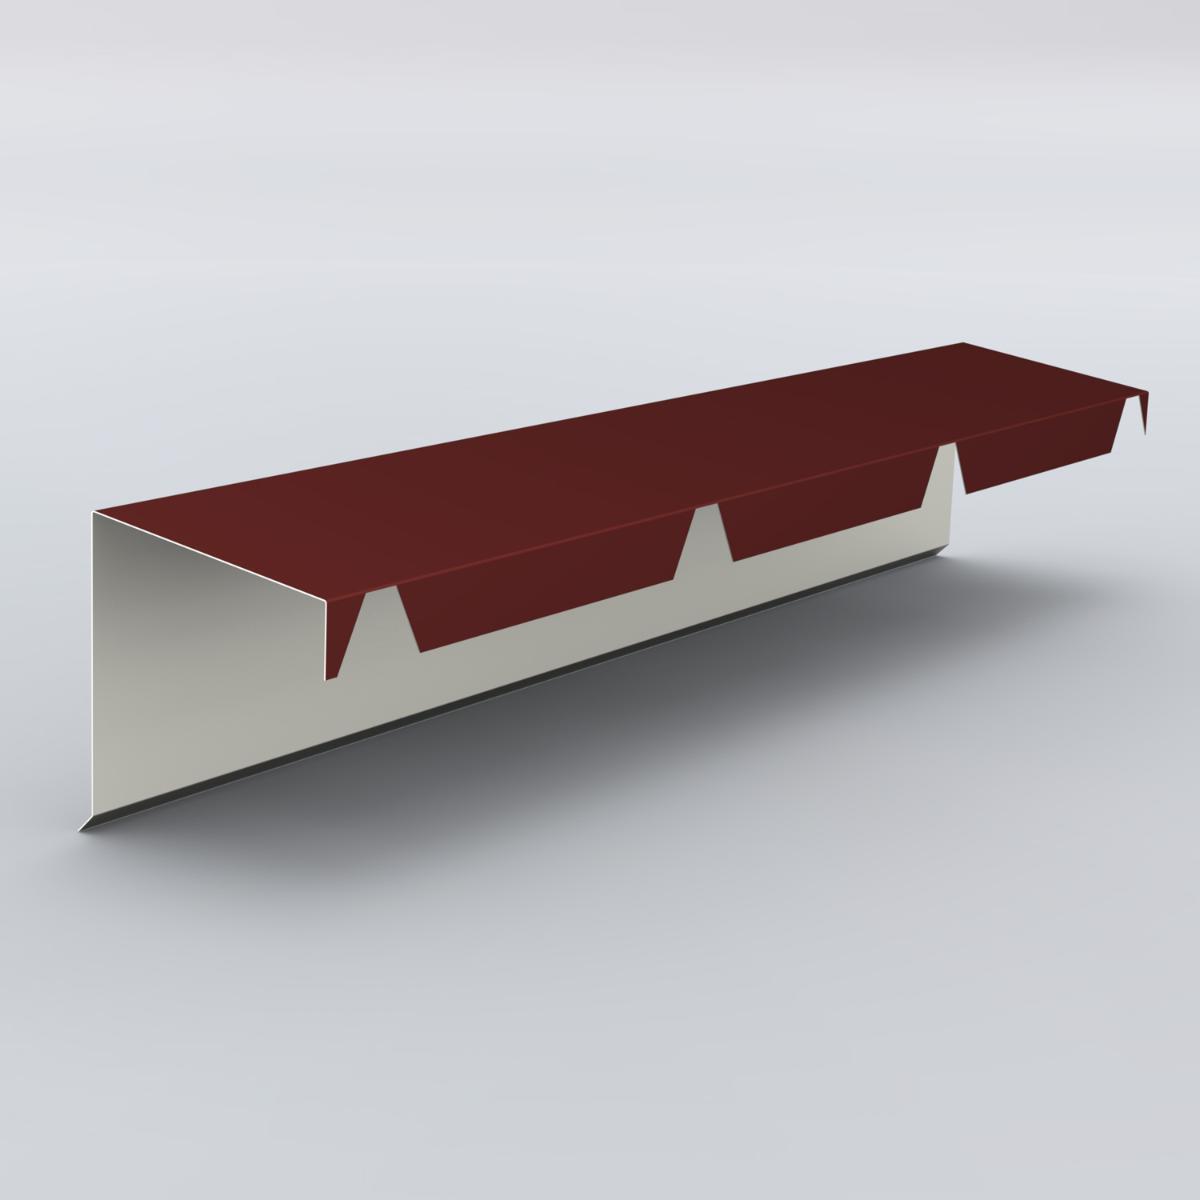 Ridge course toothed 45 R8012 D400 2100mm